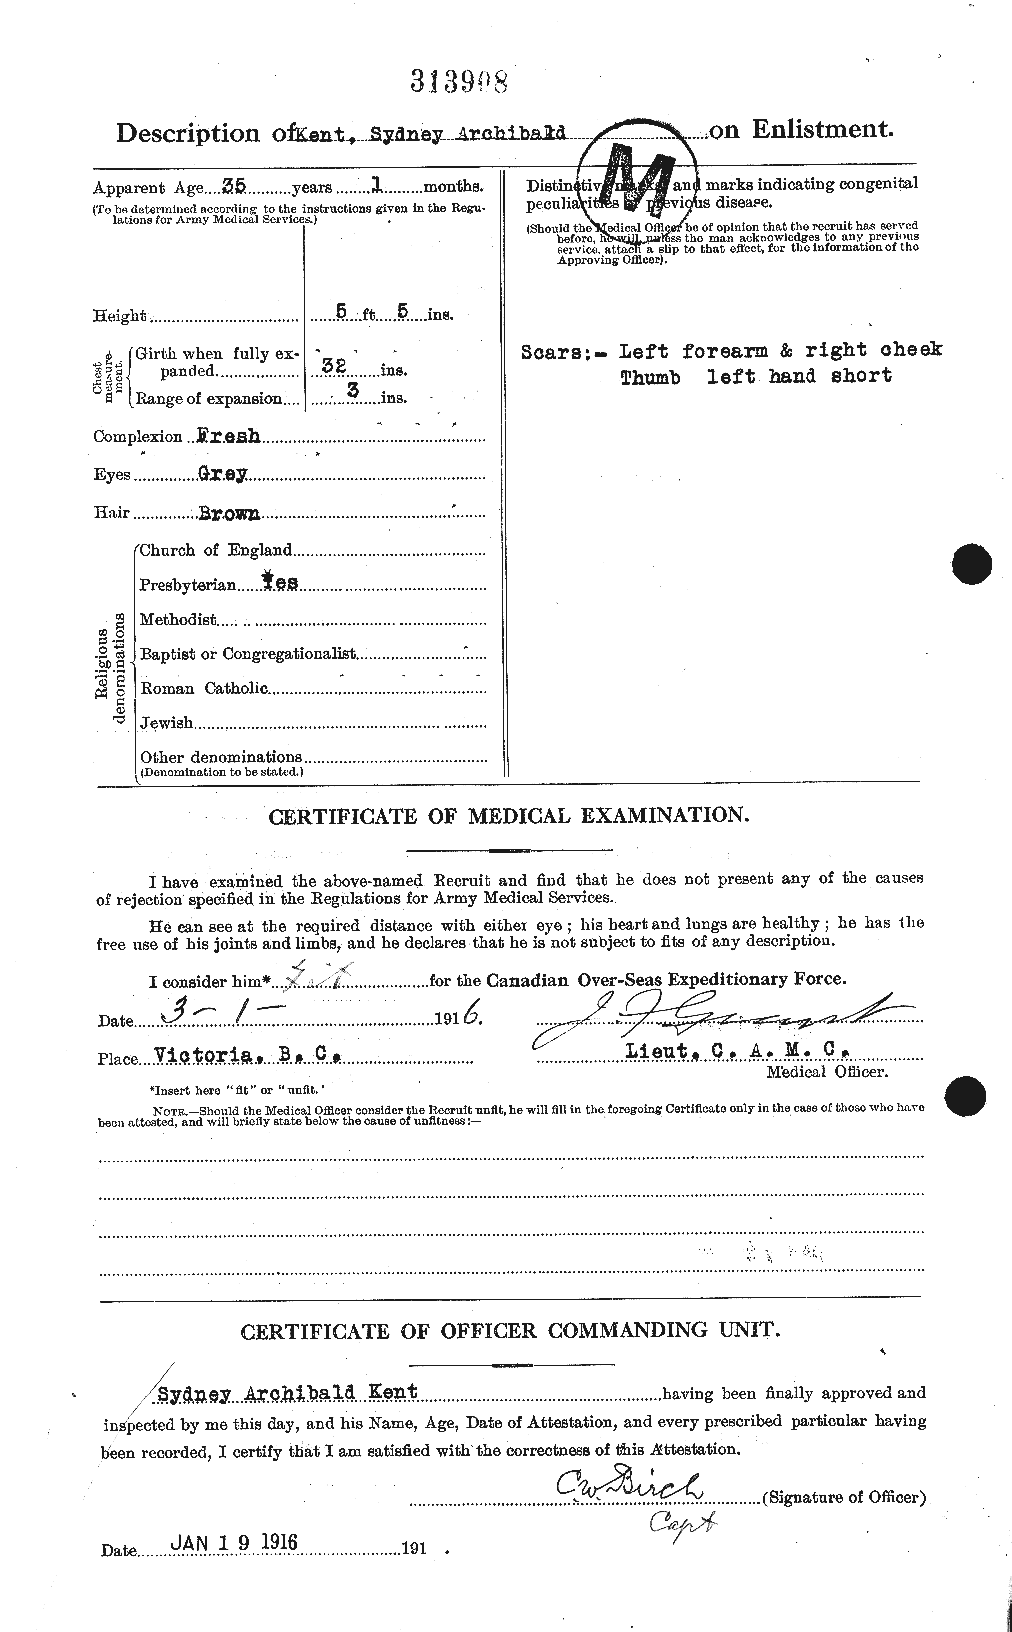 Personnel Records of the First World War - CEF 429560b